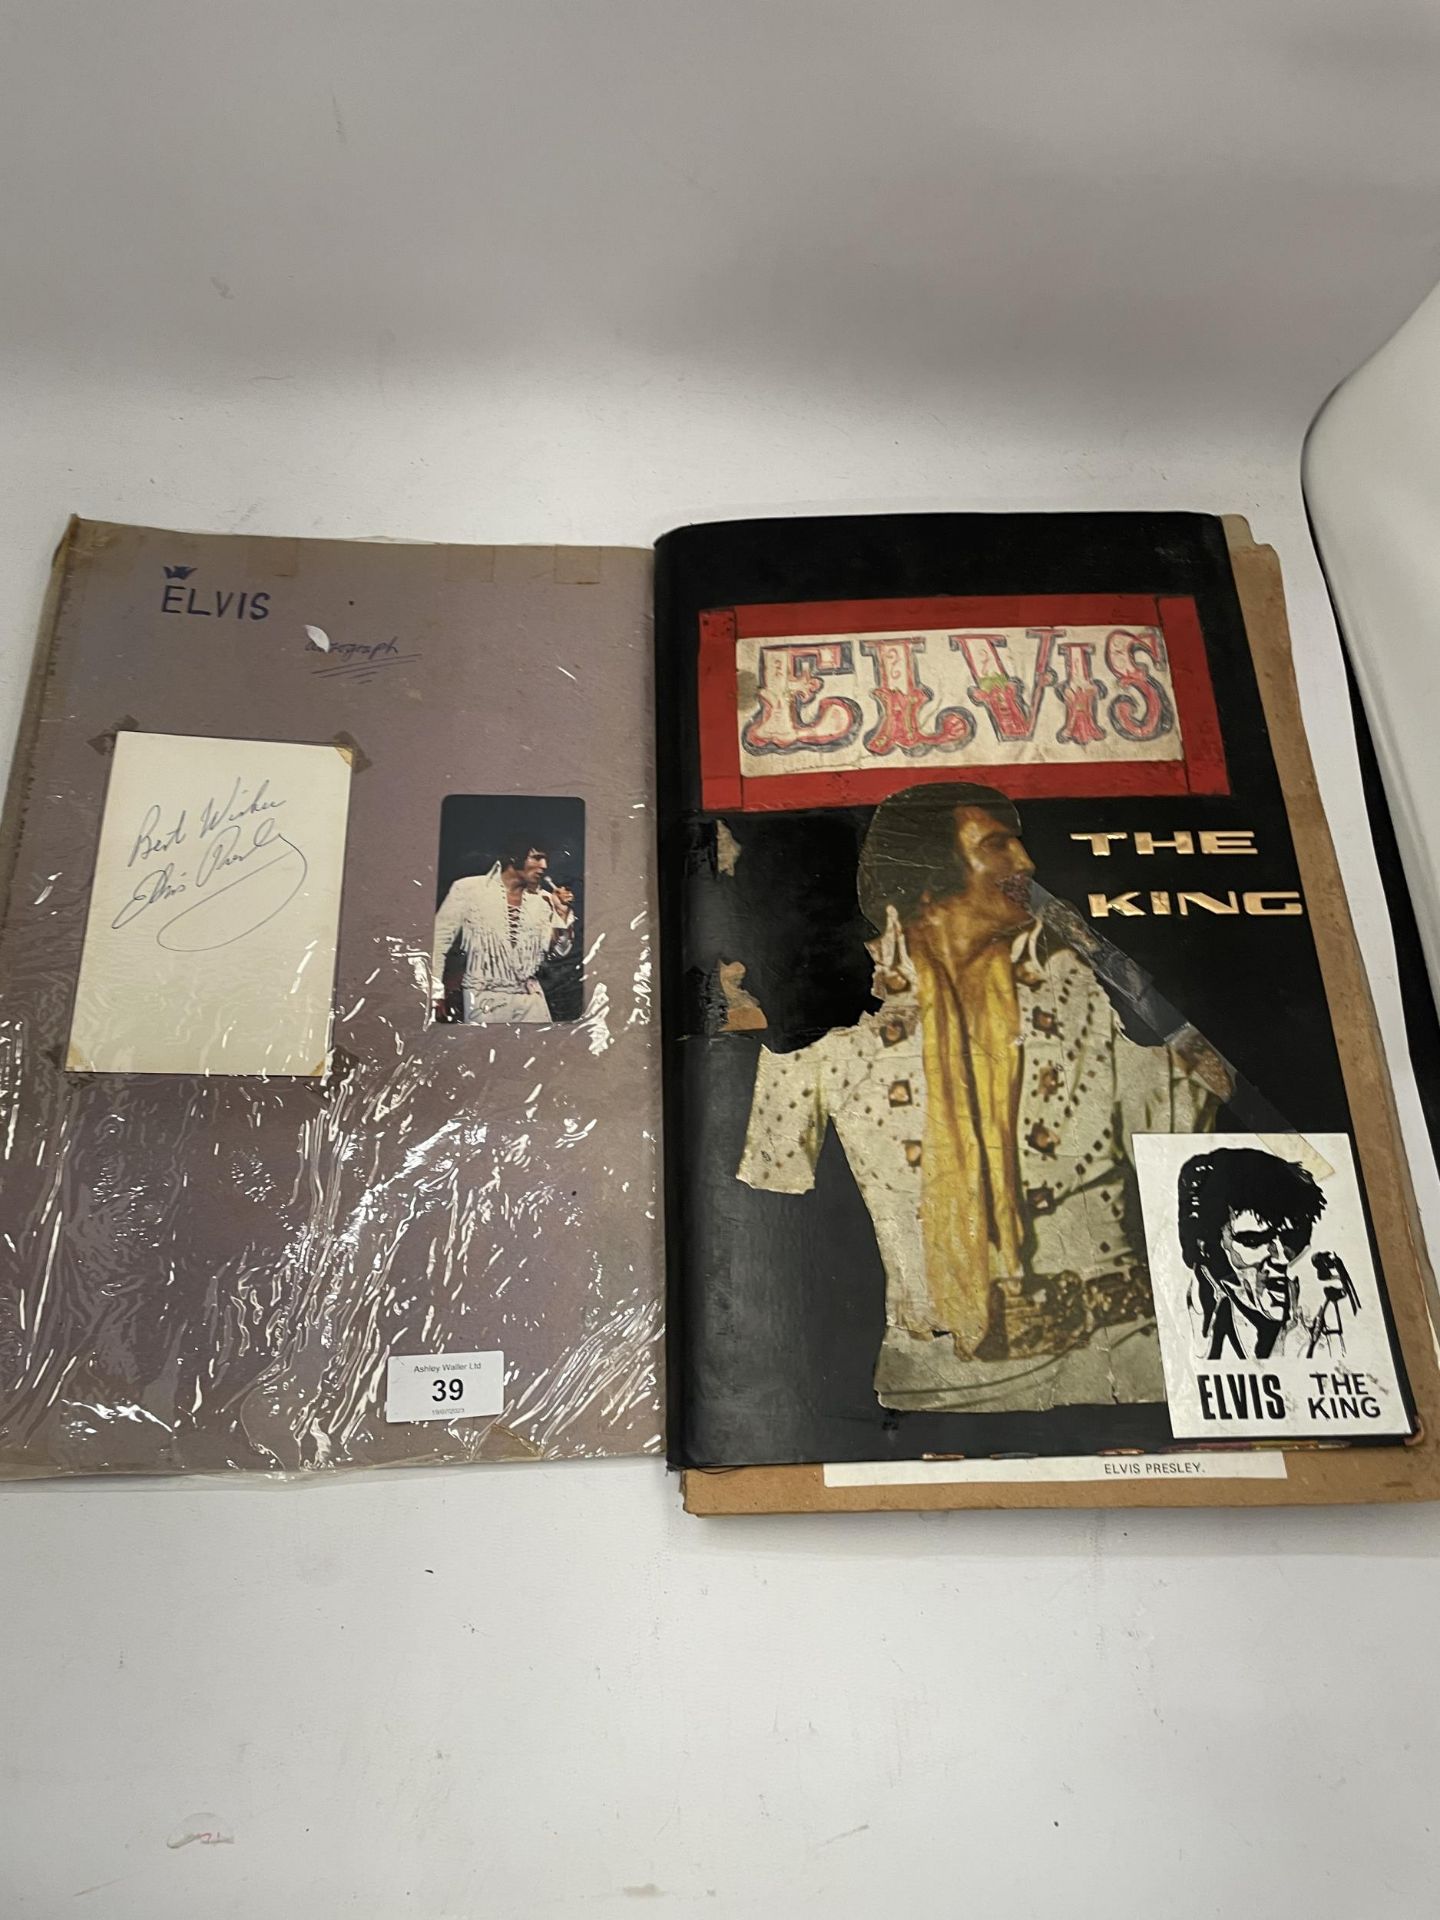 A 1970'S ELVIS PRESLEY AUTOGRAPH FROM AN ELVIS PRESLEY SCRAP BOOK - BELIEVED AUTHENTIC BUT NO